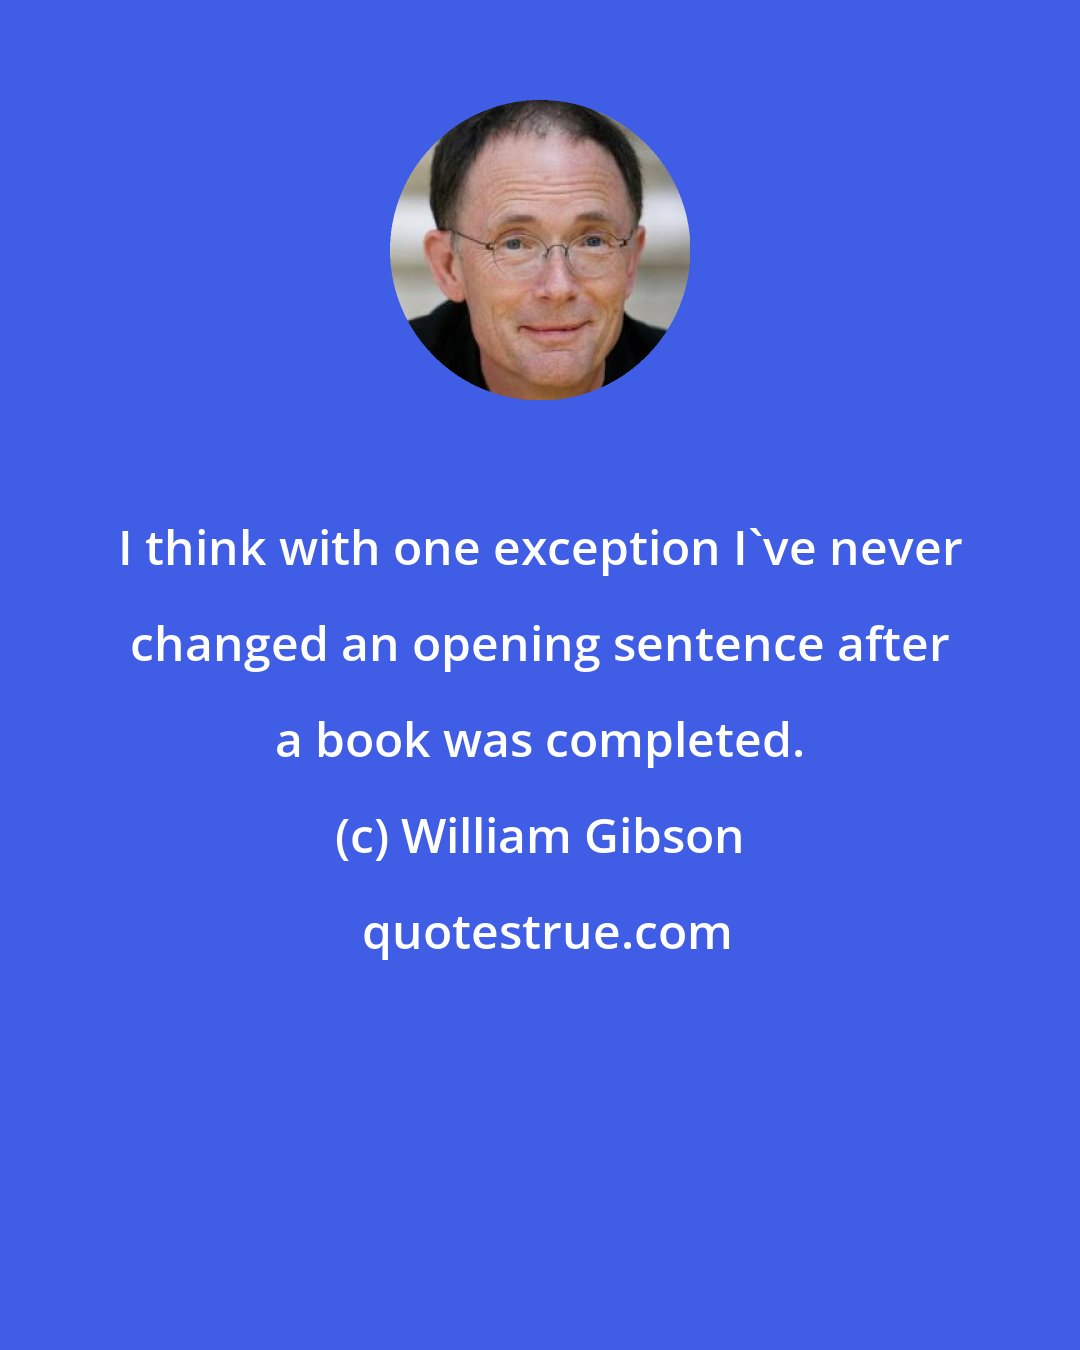 William Gibson: I think with one exception I've never changed an opening sentence after a book was completed.